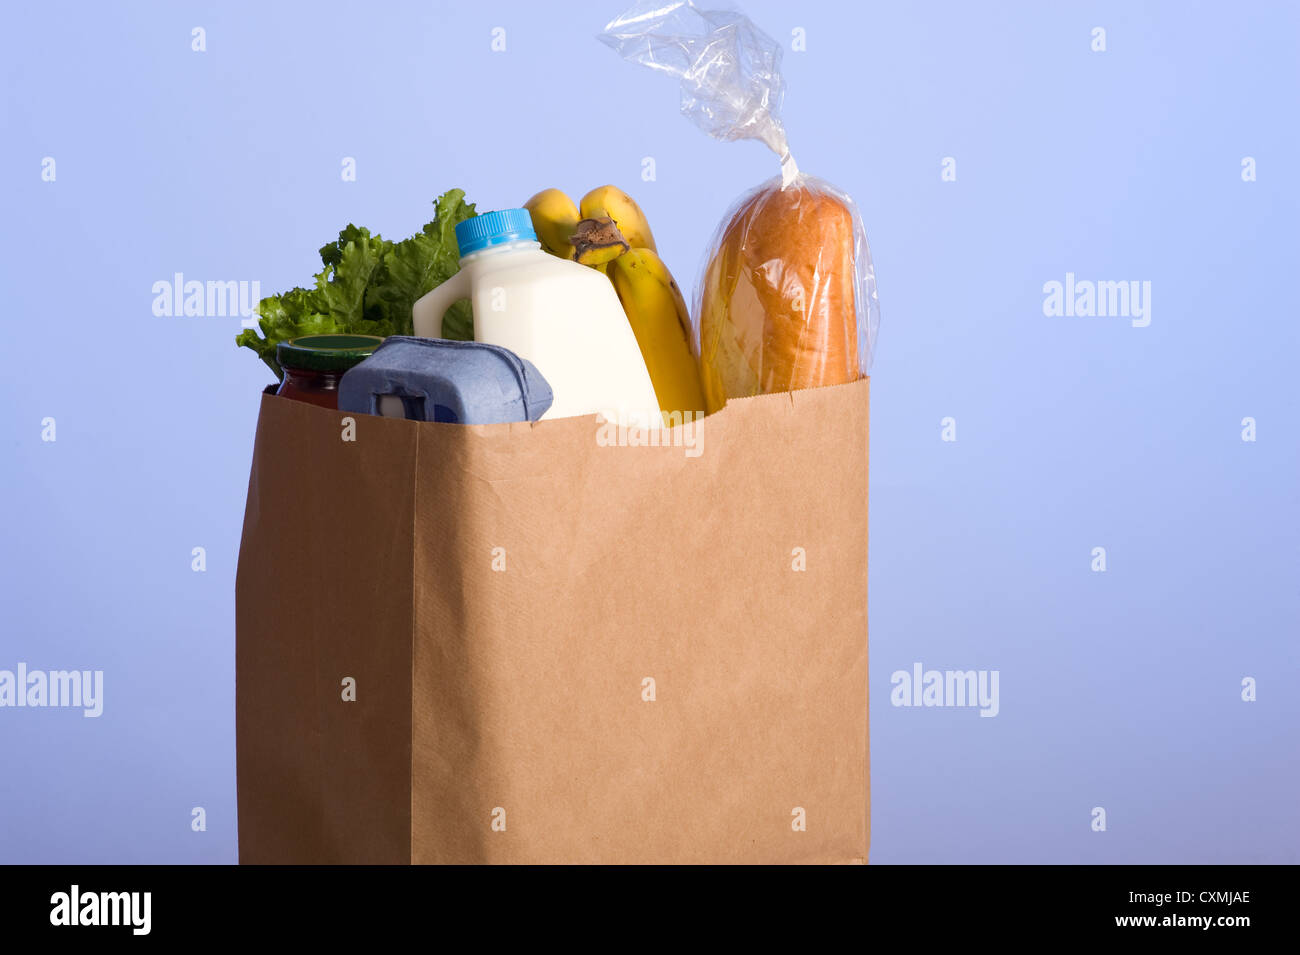 A brown paper bag full of groceries on a blue background, with bread, milk, eggs, pasta, lettuce and bananas. with copy space Stock Photo